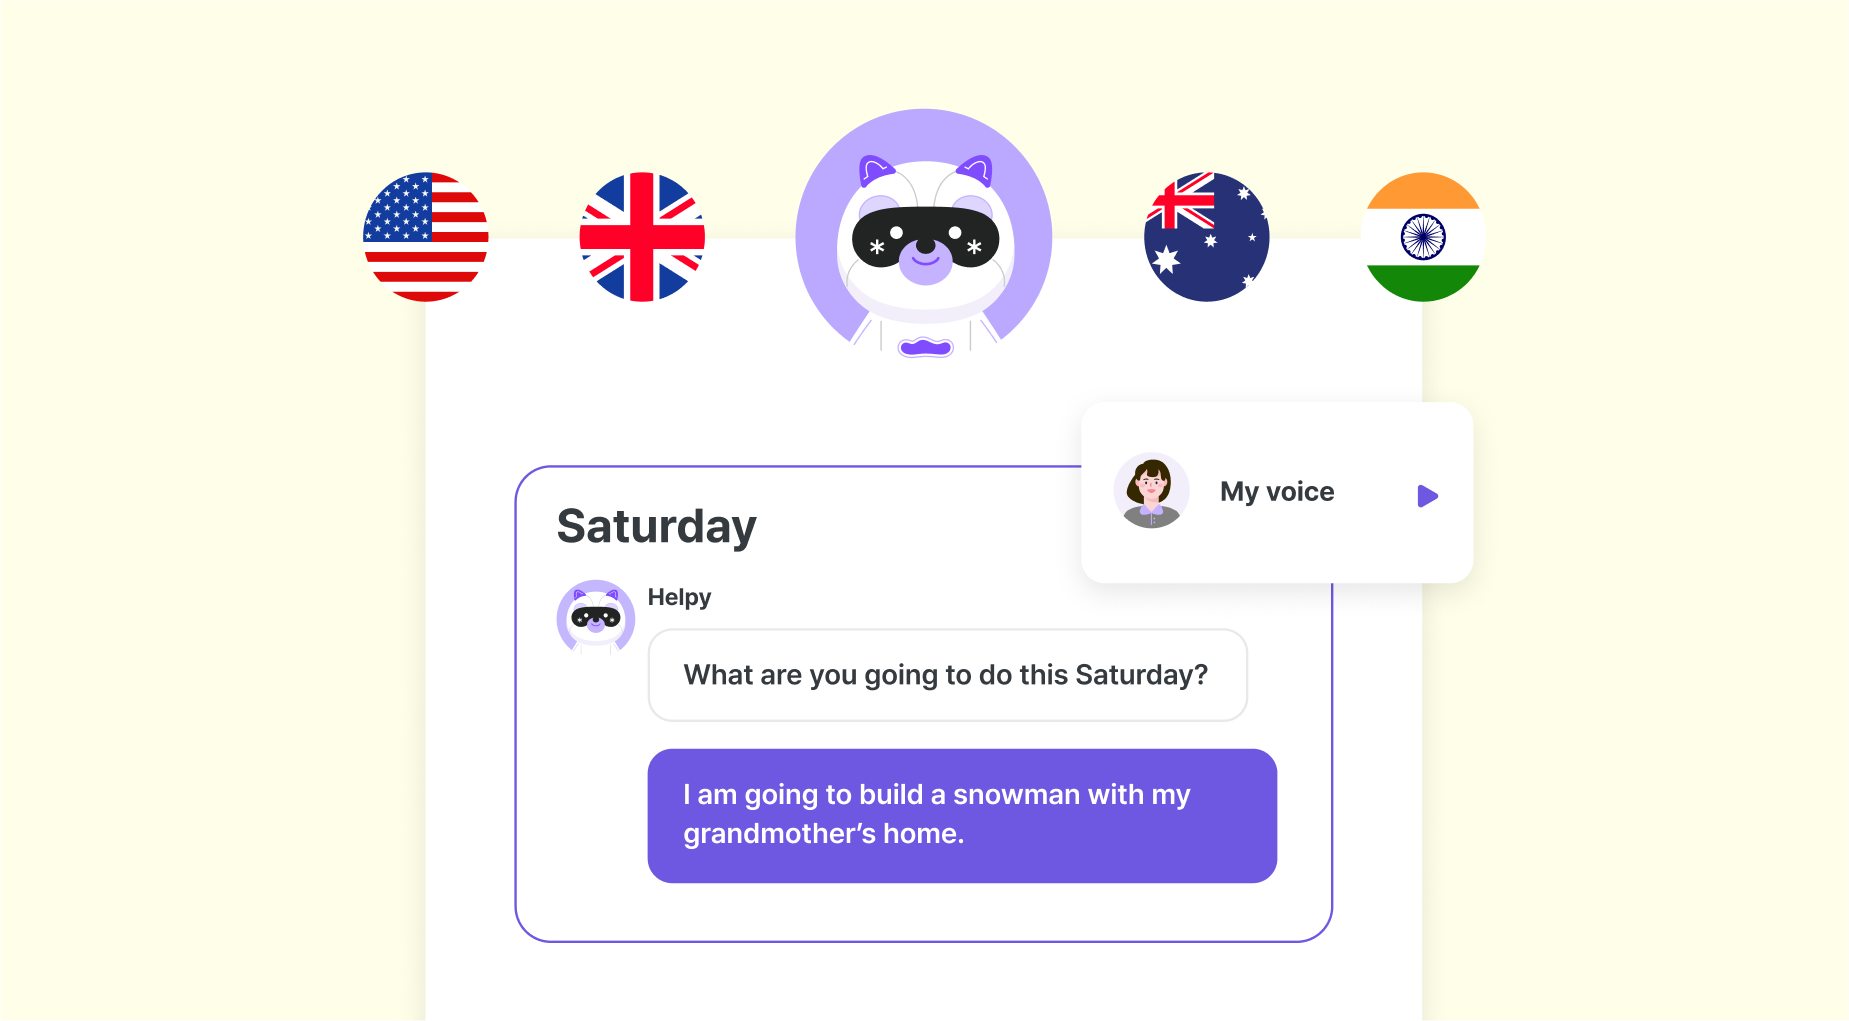 Solve math problems, converse in English, and get writing help with AI helpy